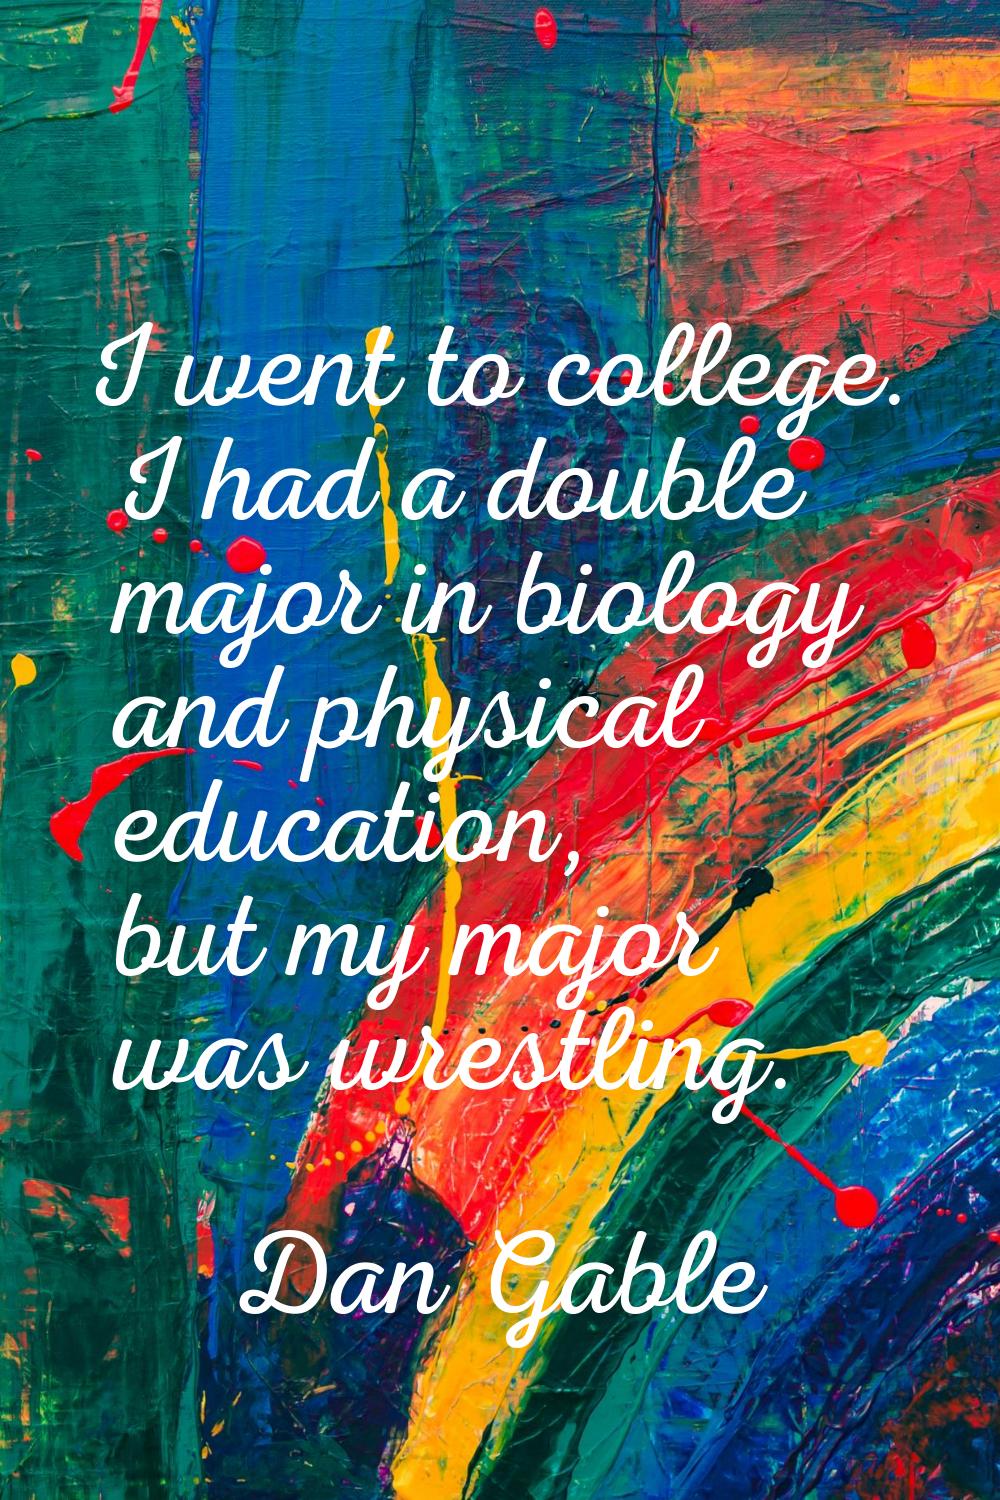 I went to college. I had a double major in biology and physical education, but my major was wrestli